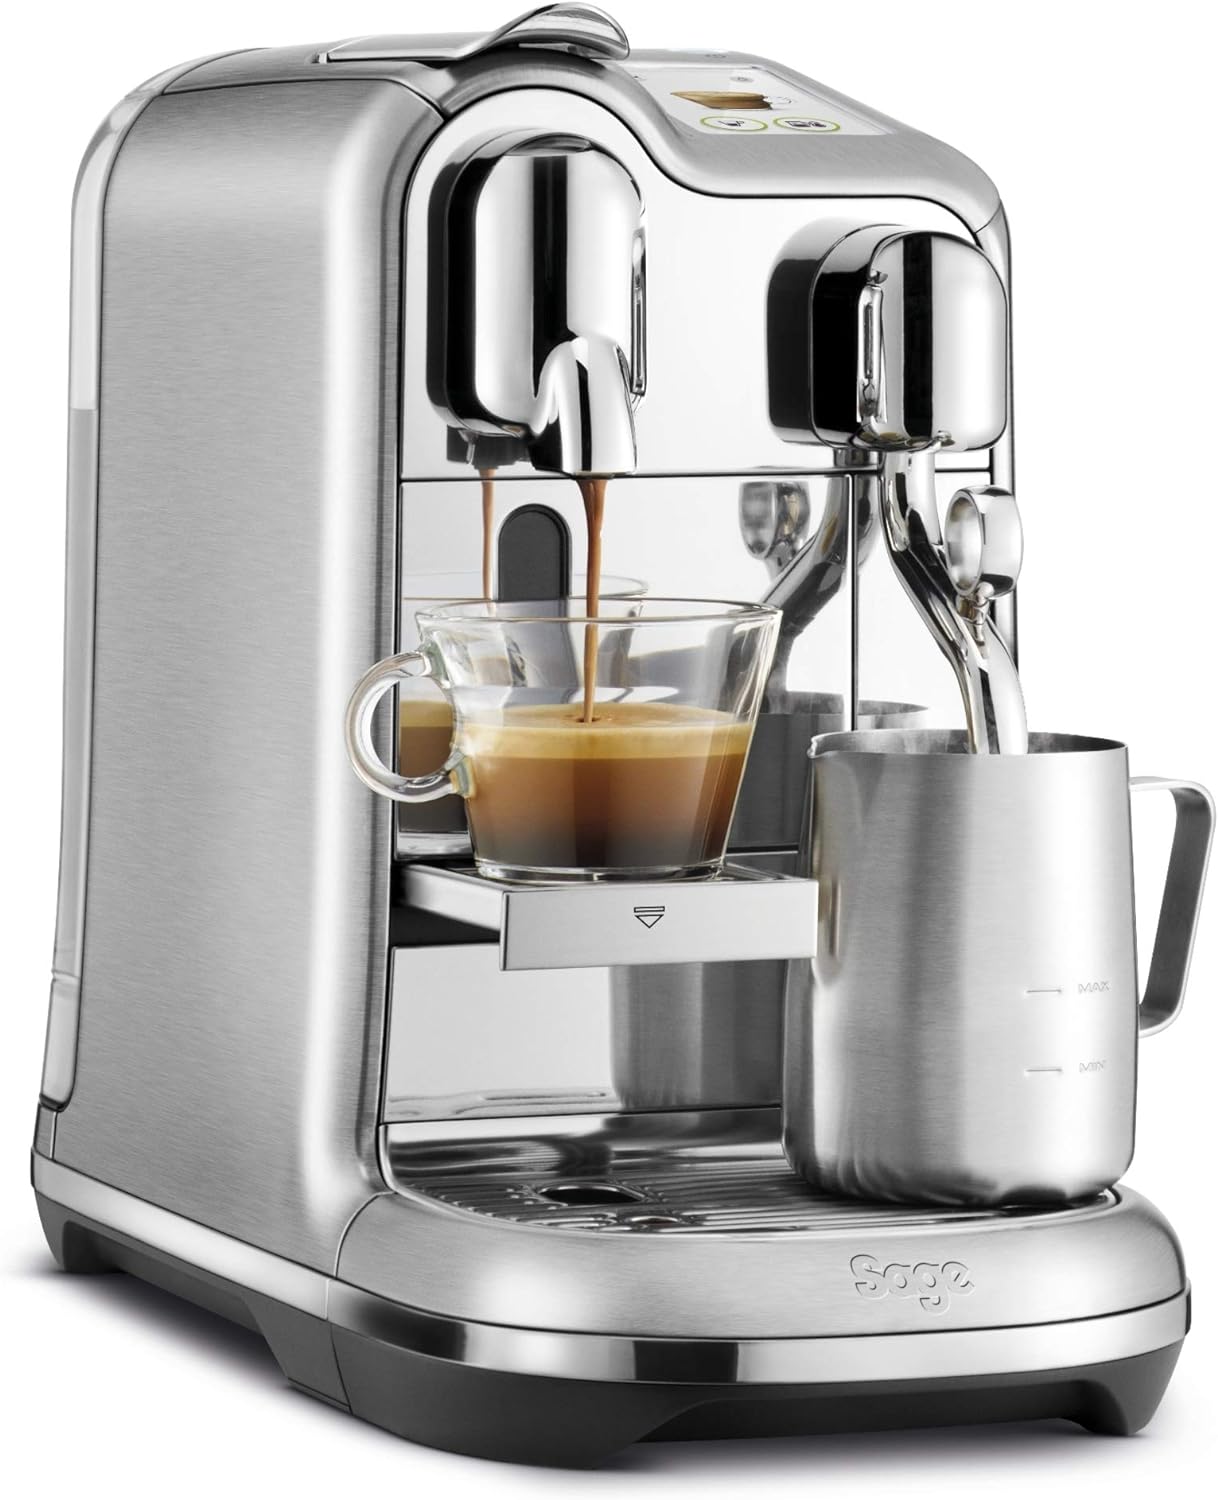 NESPRESSO SNE900 the Creatista Pro by Sage, 5.3 tons, brushed stainless steel - Amazing Gadgets Outlet